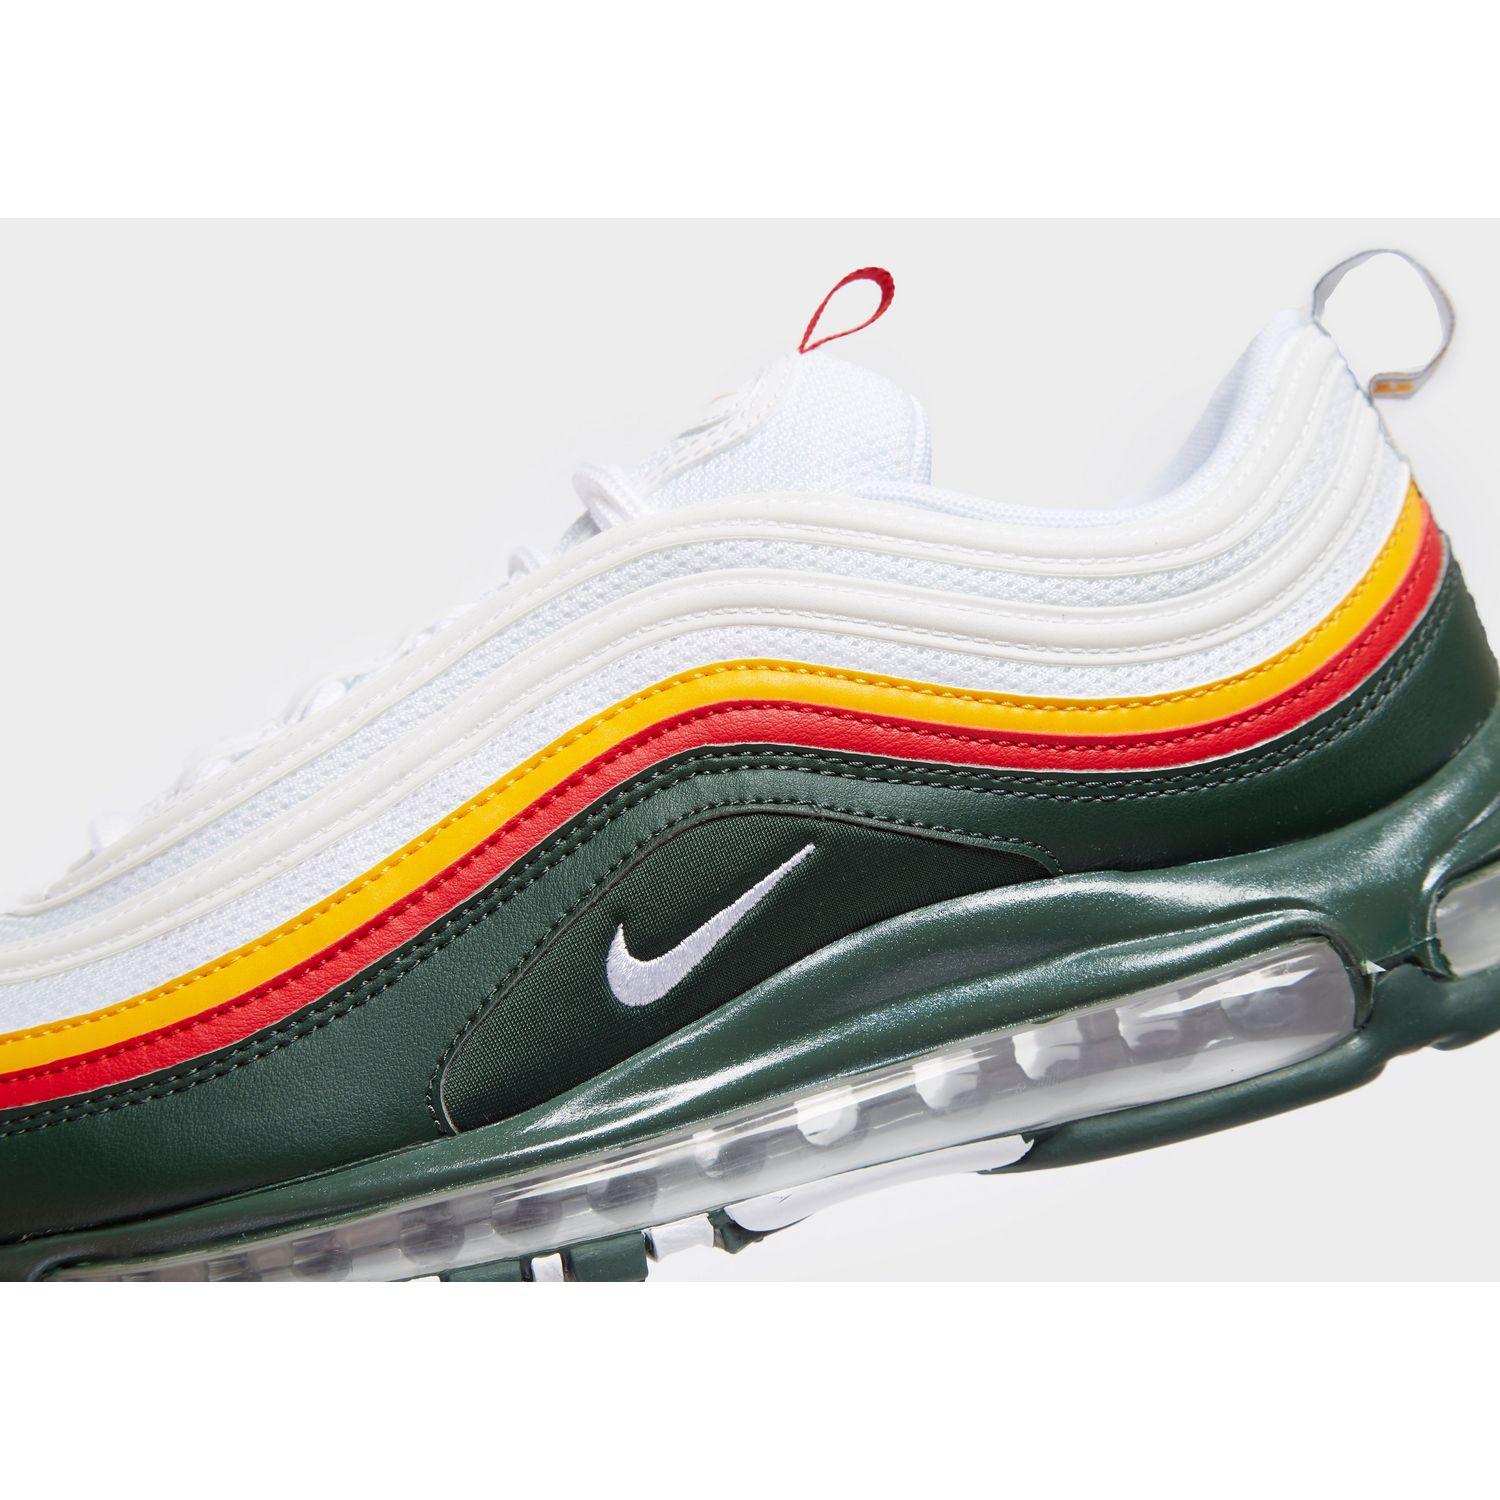 air max 97 green red yellow white